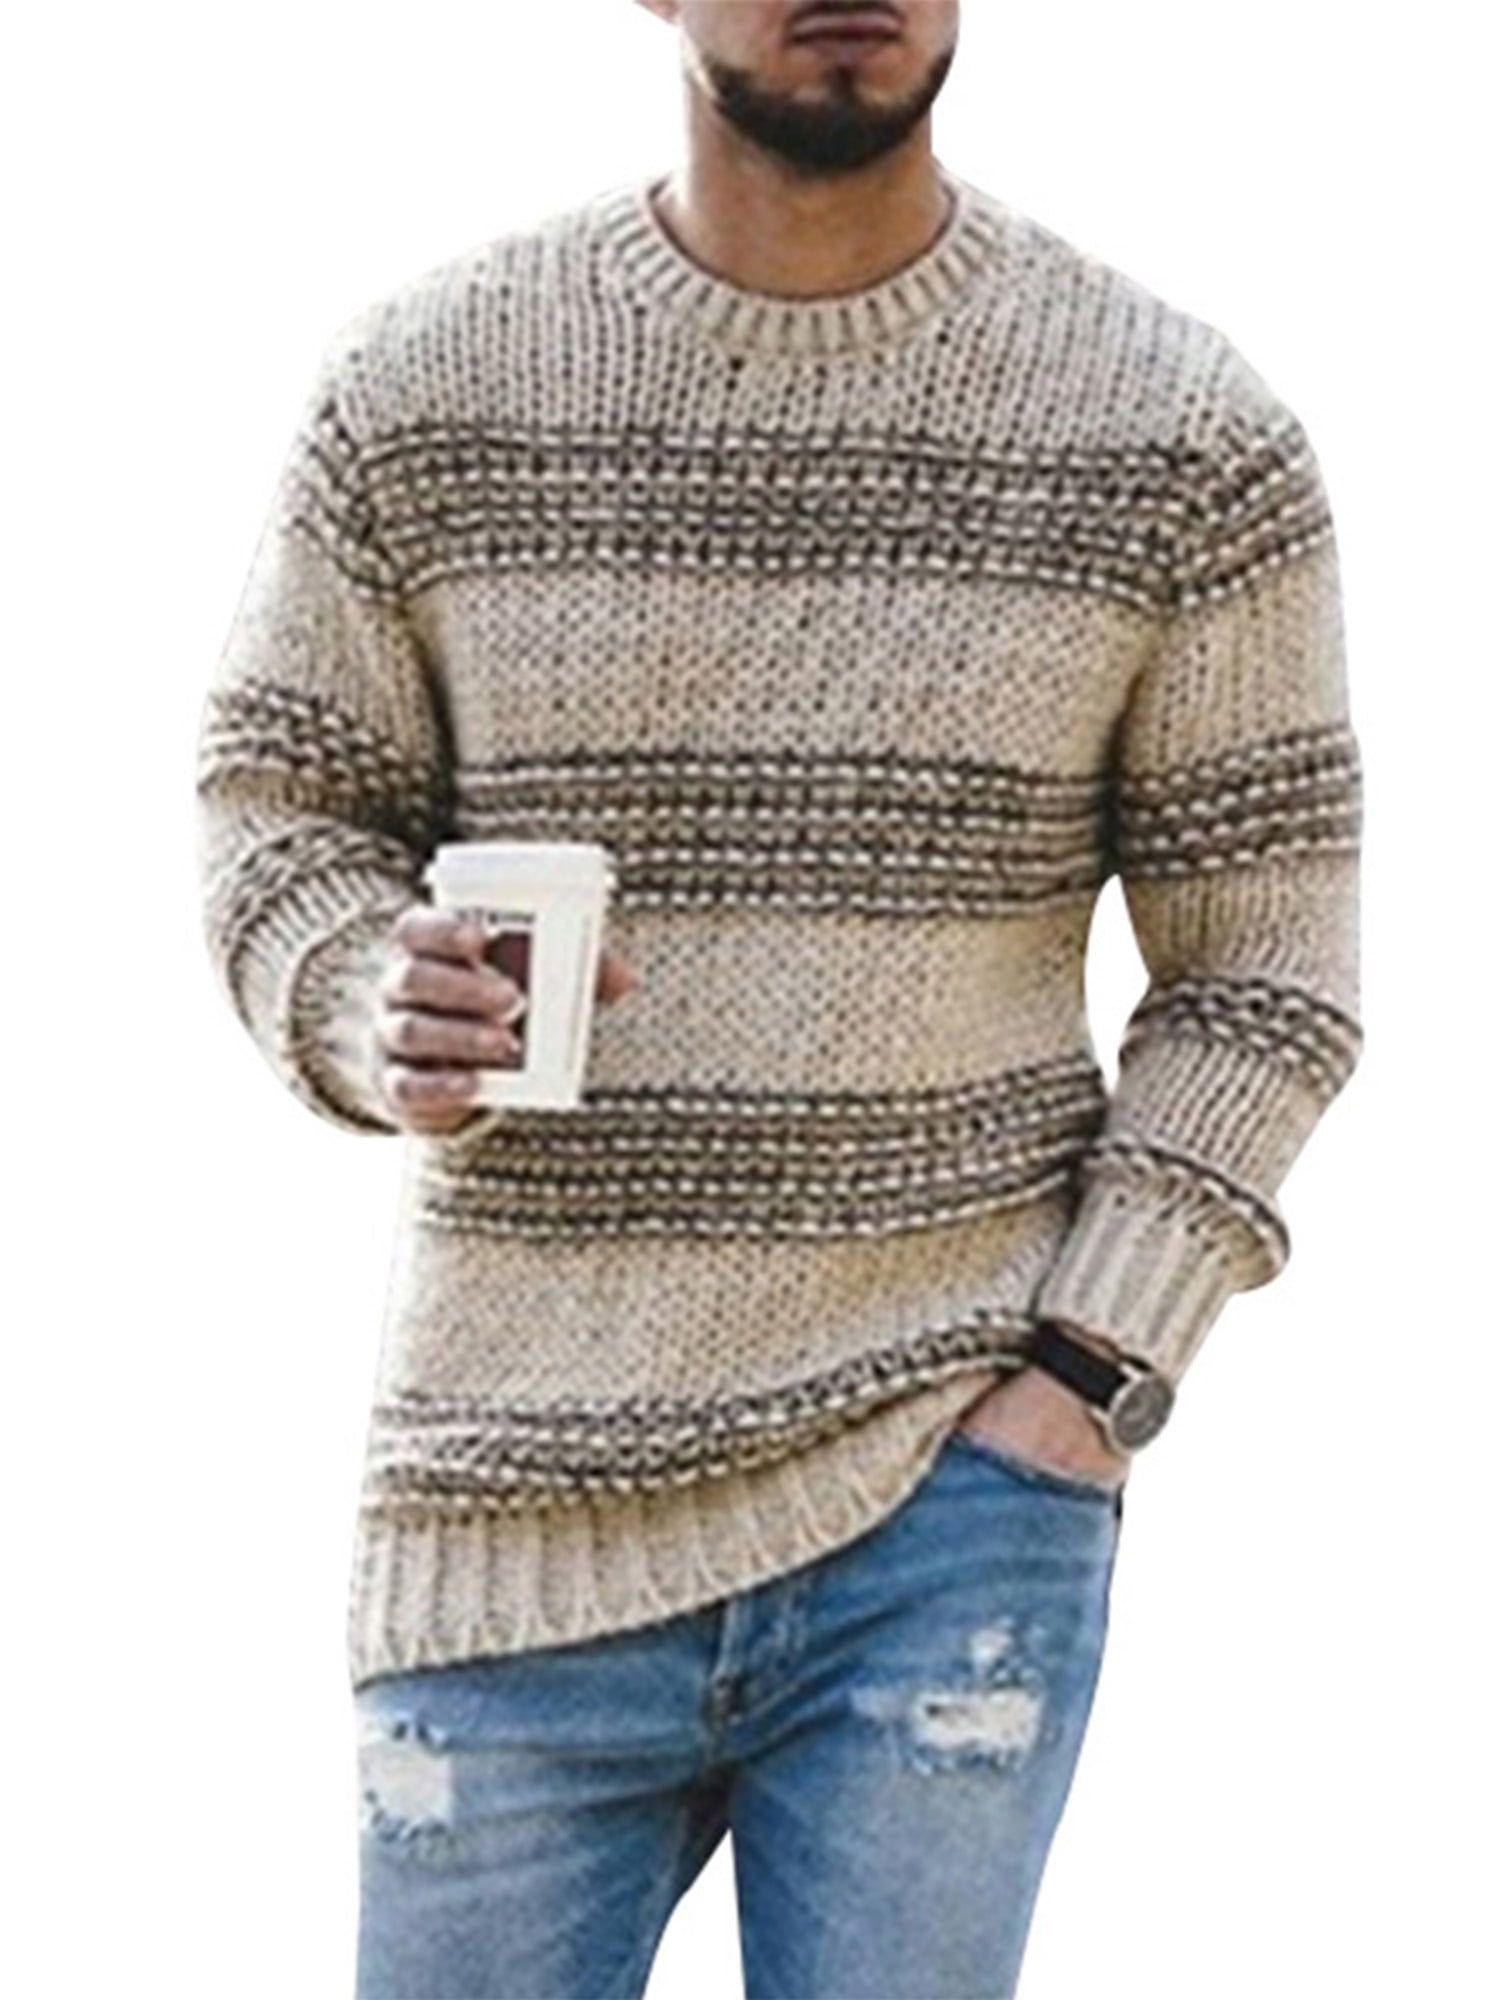 CBTLVSN Mens Slim Knitted Sweater Casual Crewneck Stripe Pullover Sweaters Tops